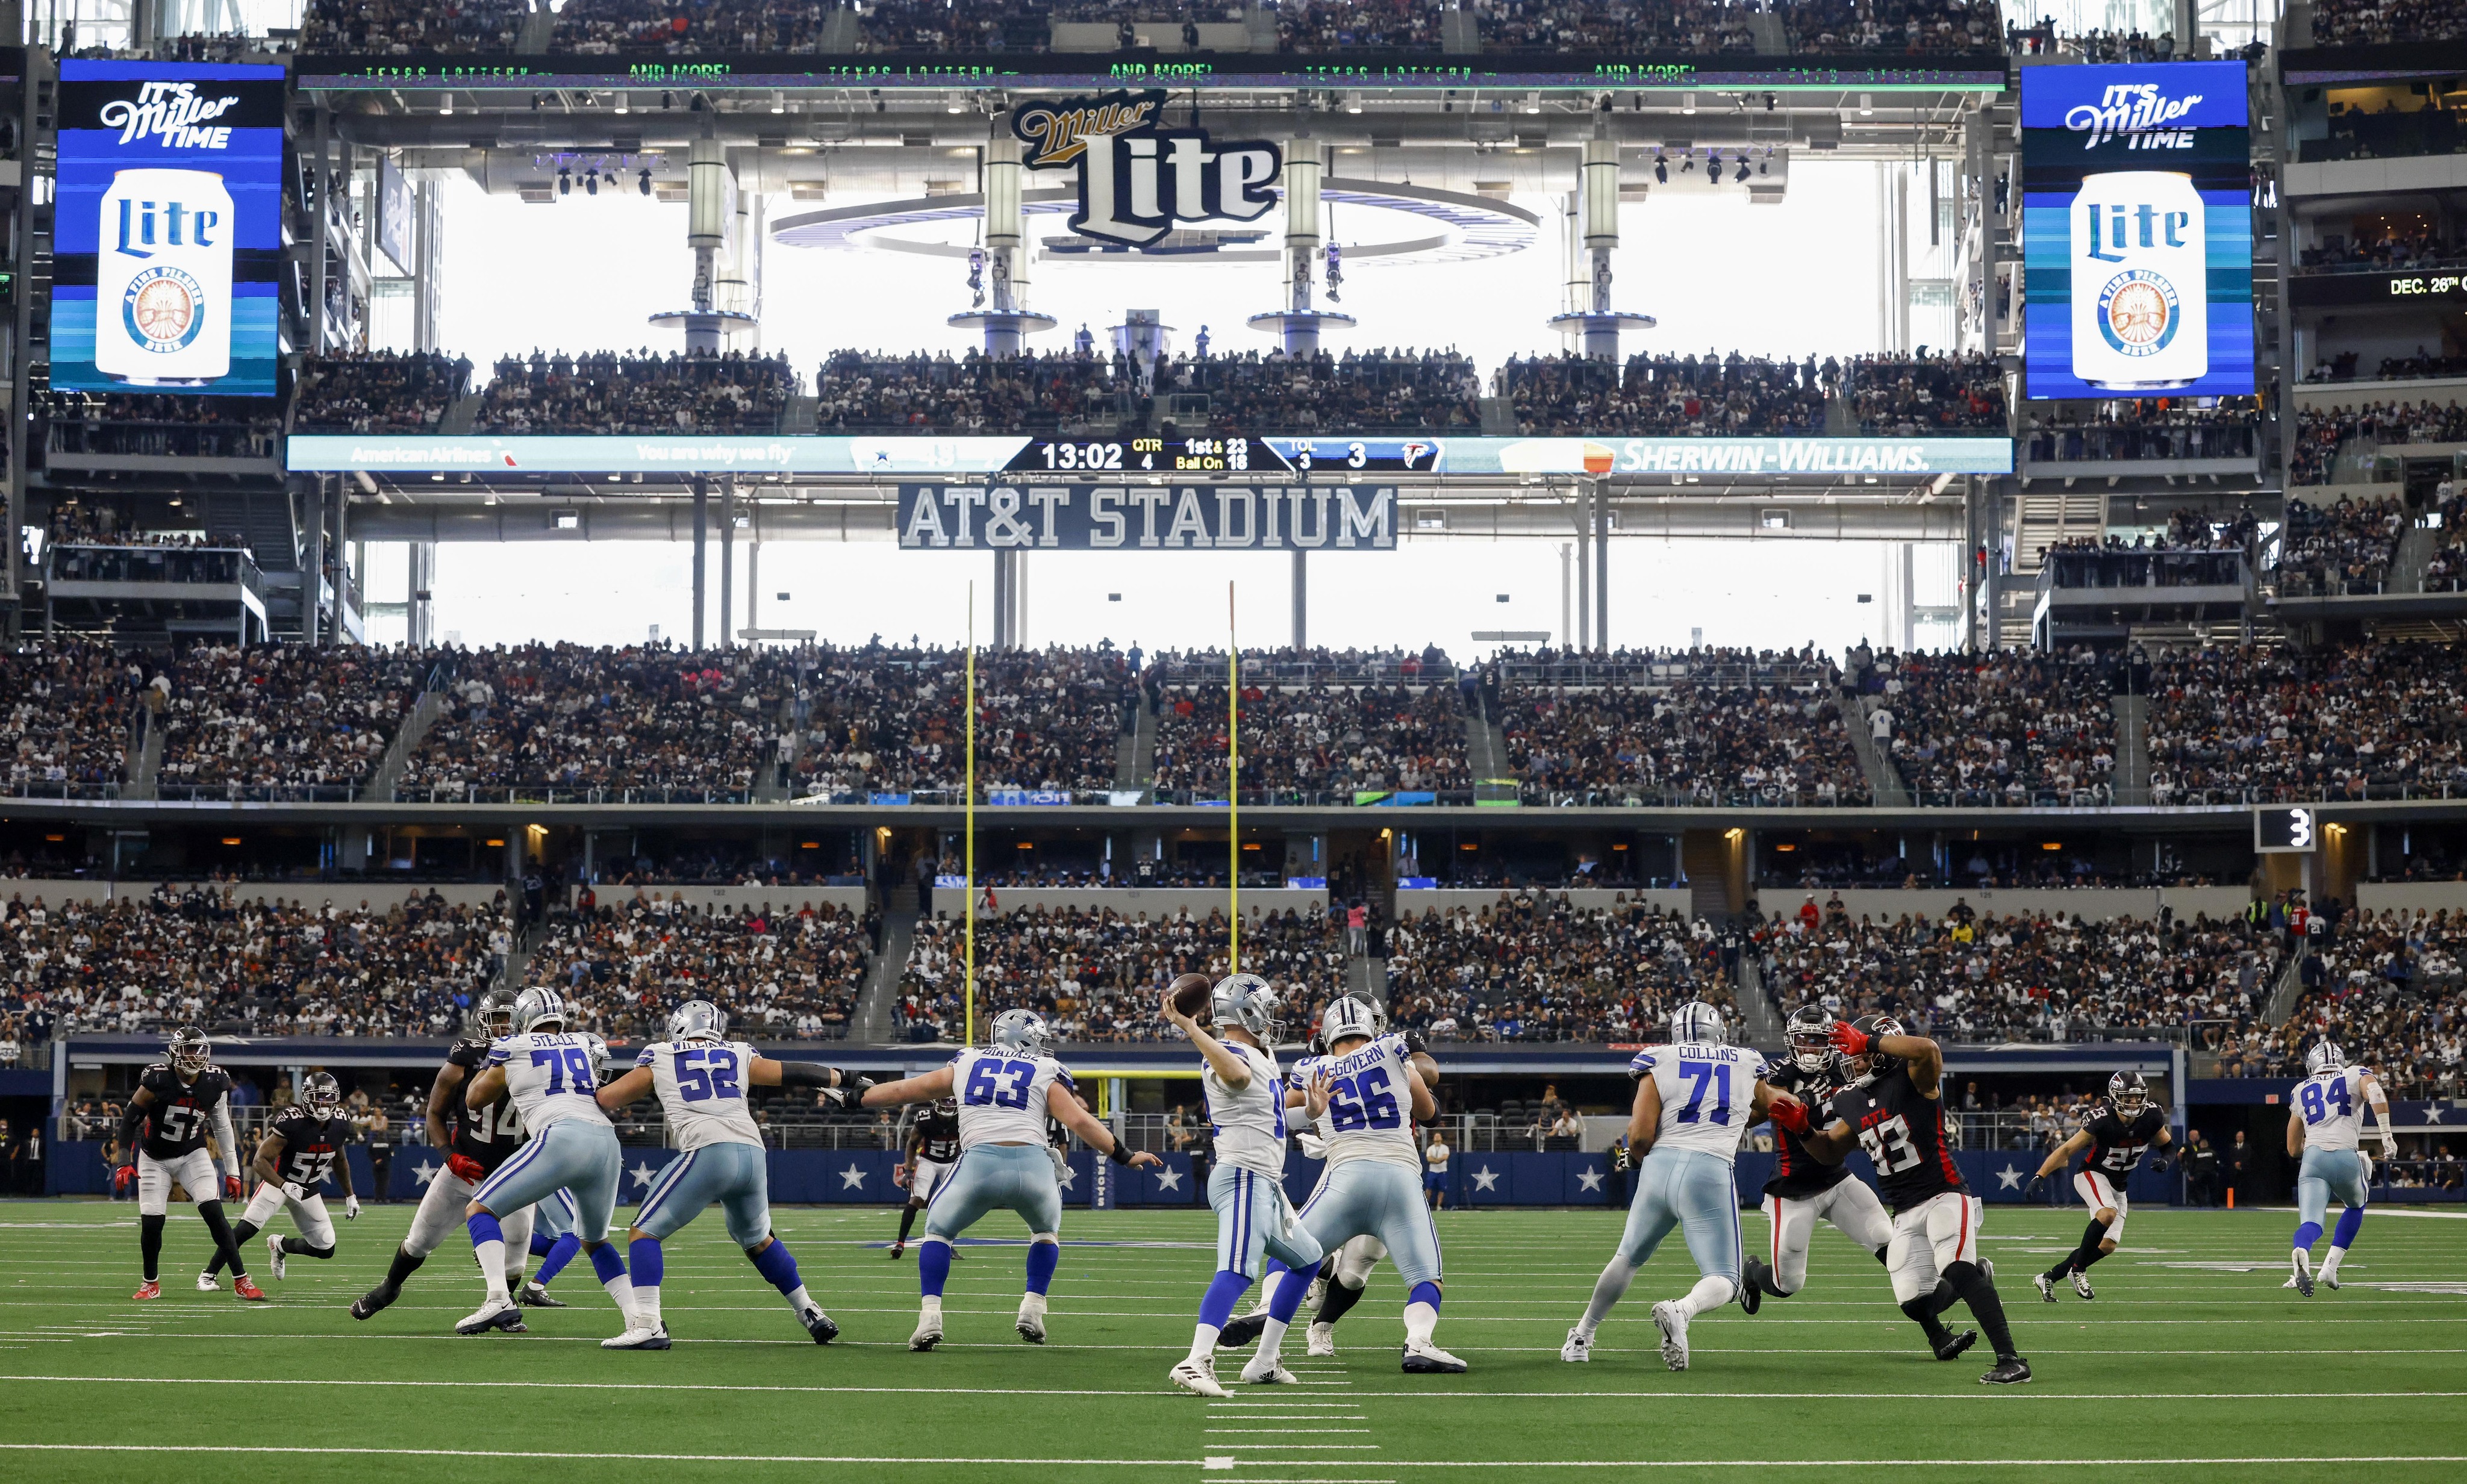 NFL evaluating AT&T Stadium as potential backup site for Super